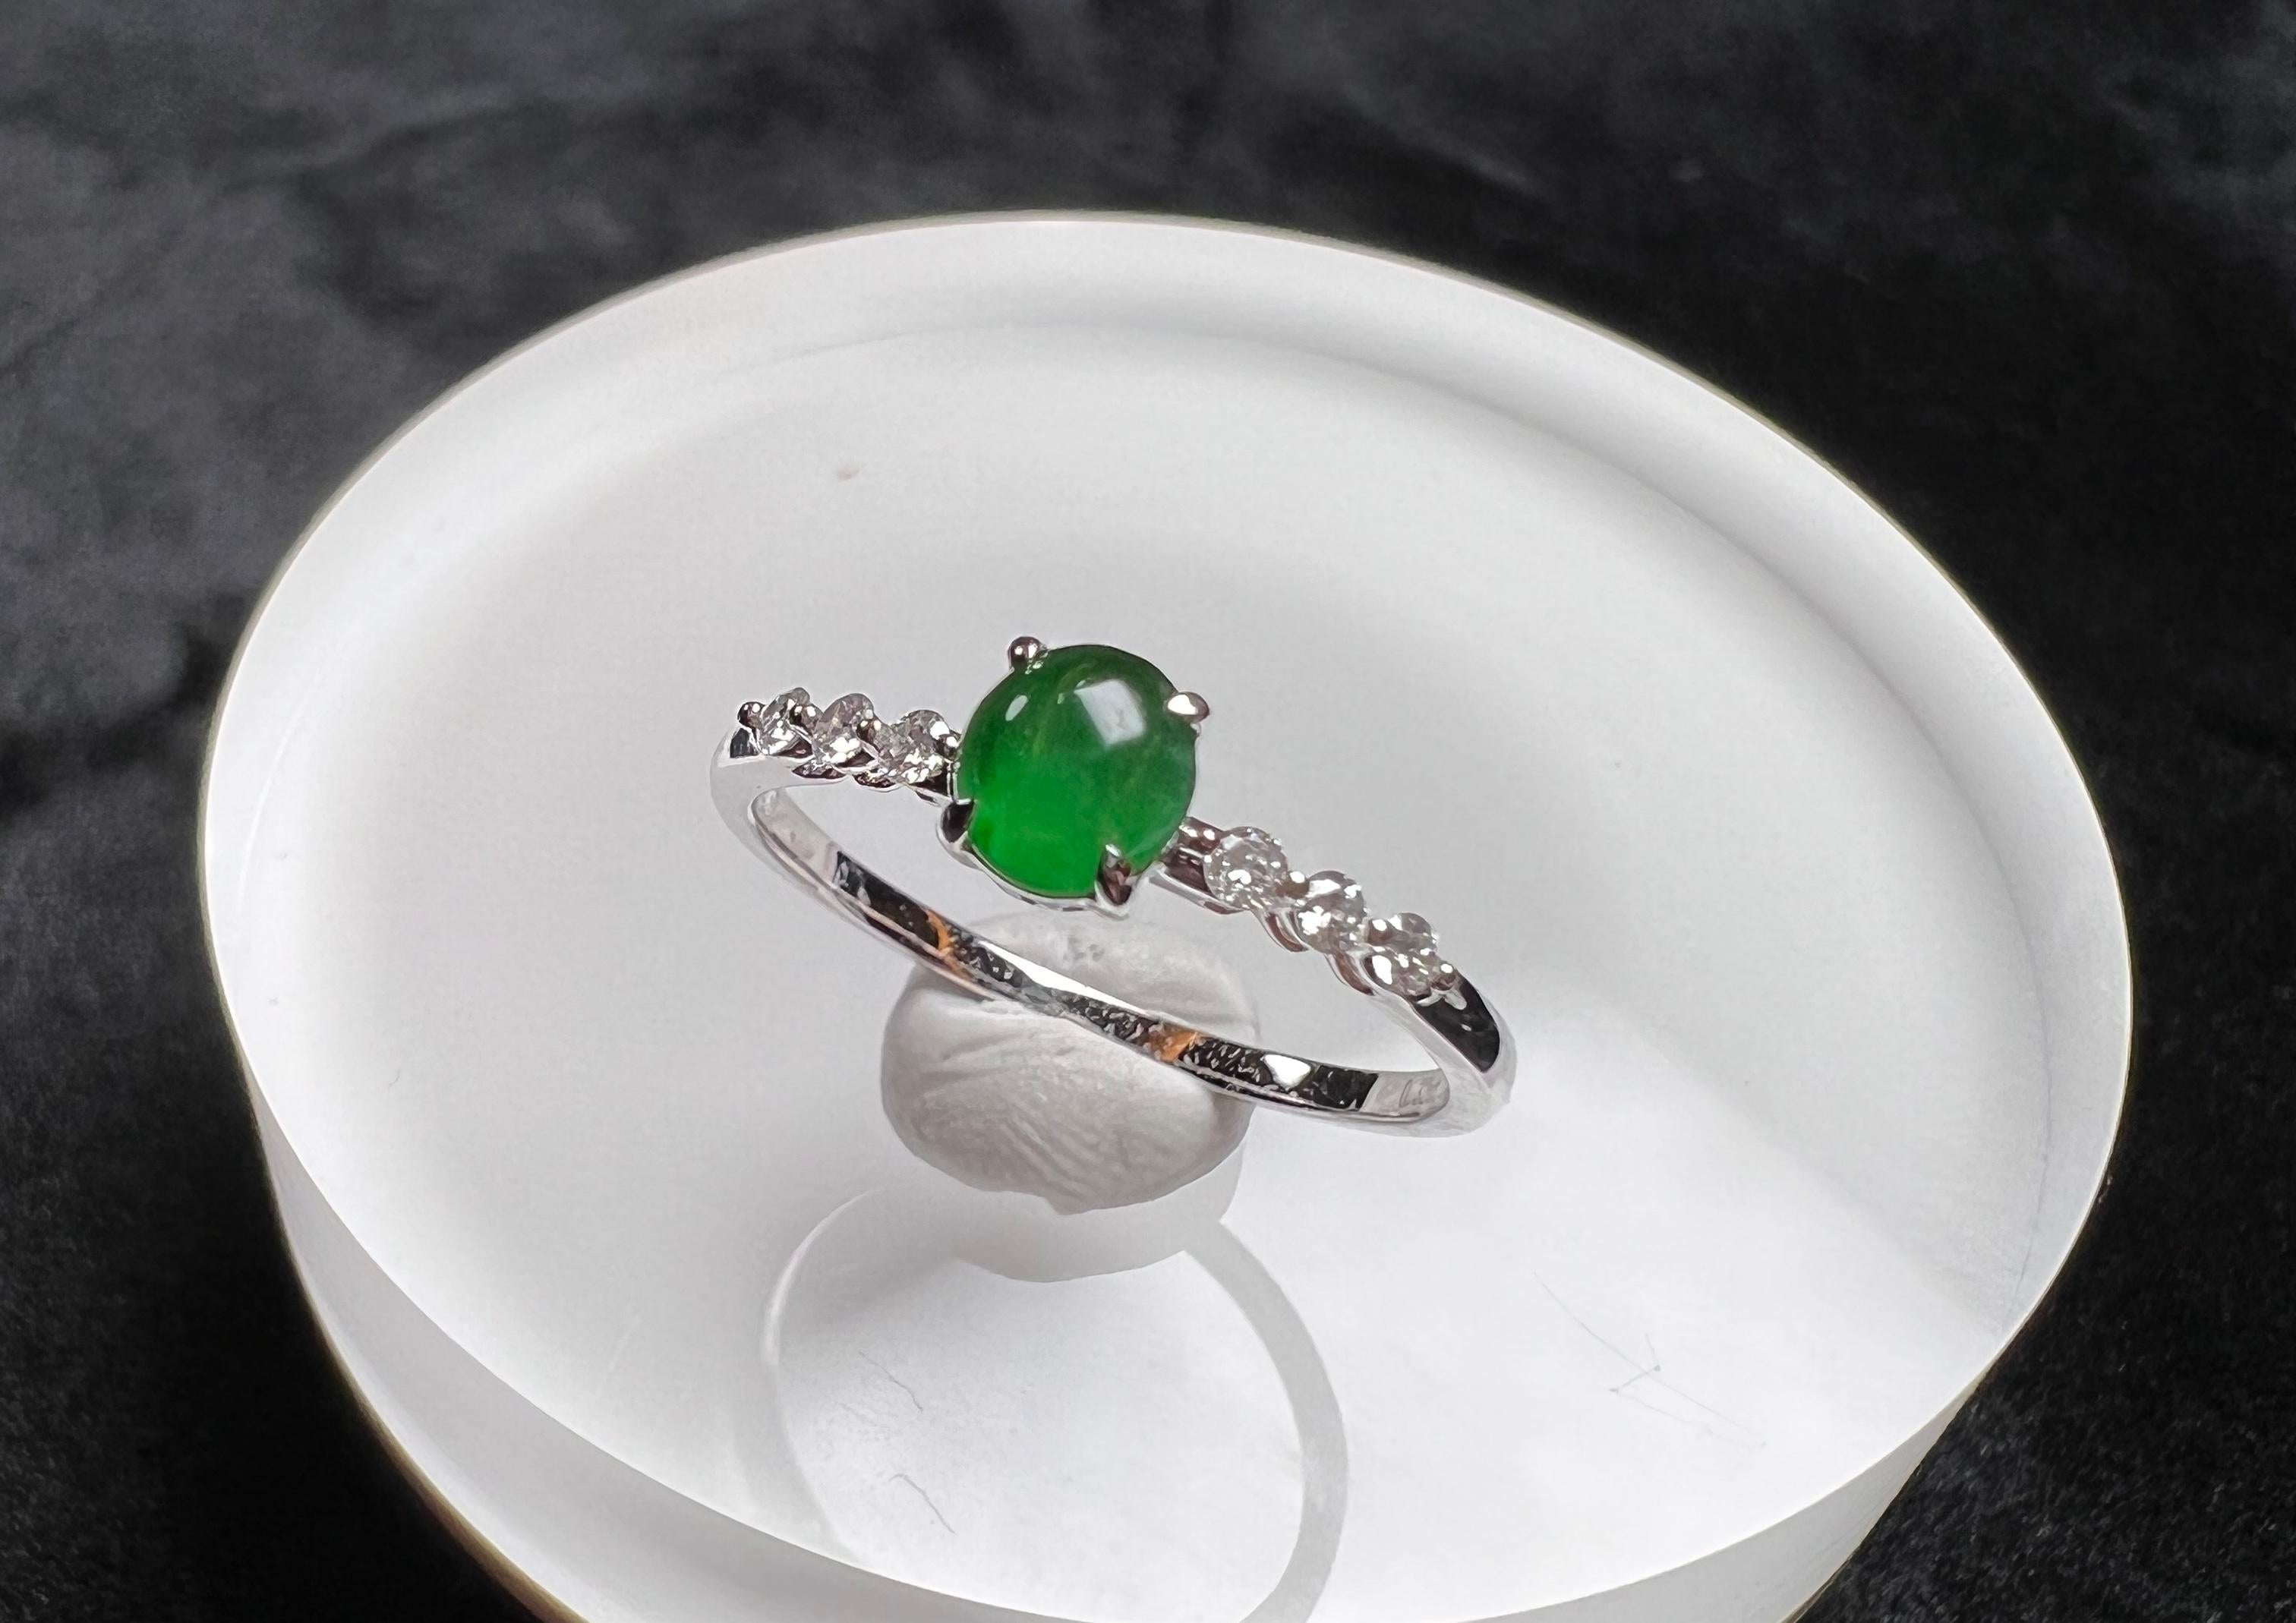 18K White Gold Oval Green Jadeite Round Brilliant Diamond Ring, Engagement Ring

Size M 1/2 (UK) / 6.5 (US)
Circumference (approx.): 53mm
Diameter (approx.): 16.9mm

Total weight (approx.): 1.6g
Main stone (green jadeite) measurement (approx.):